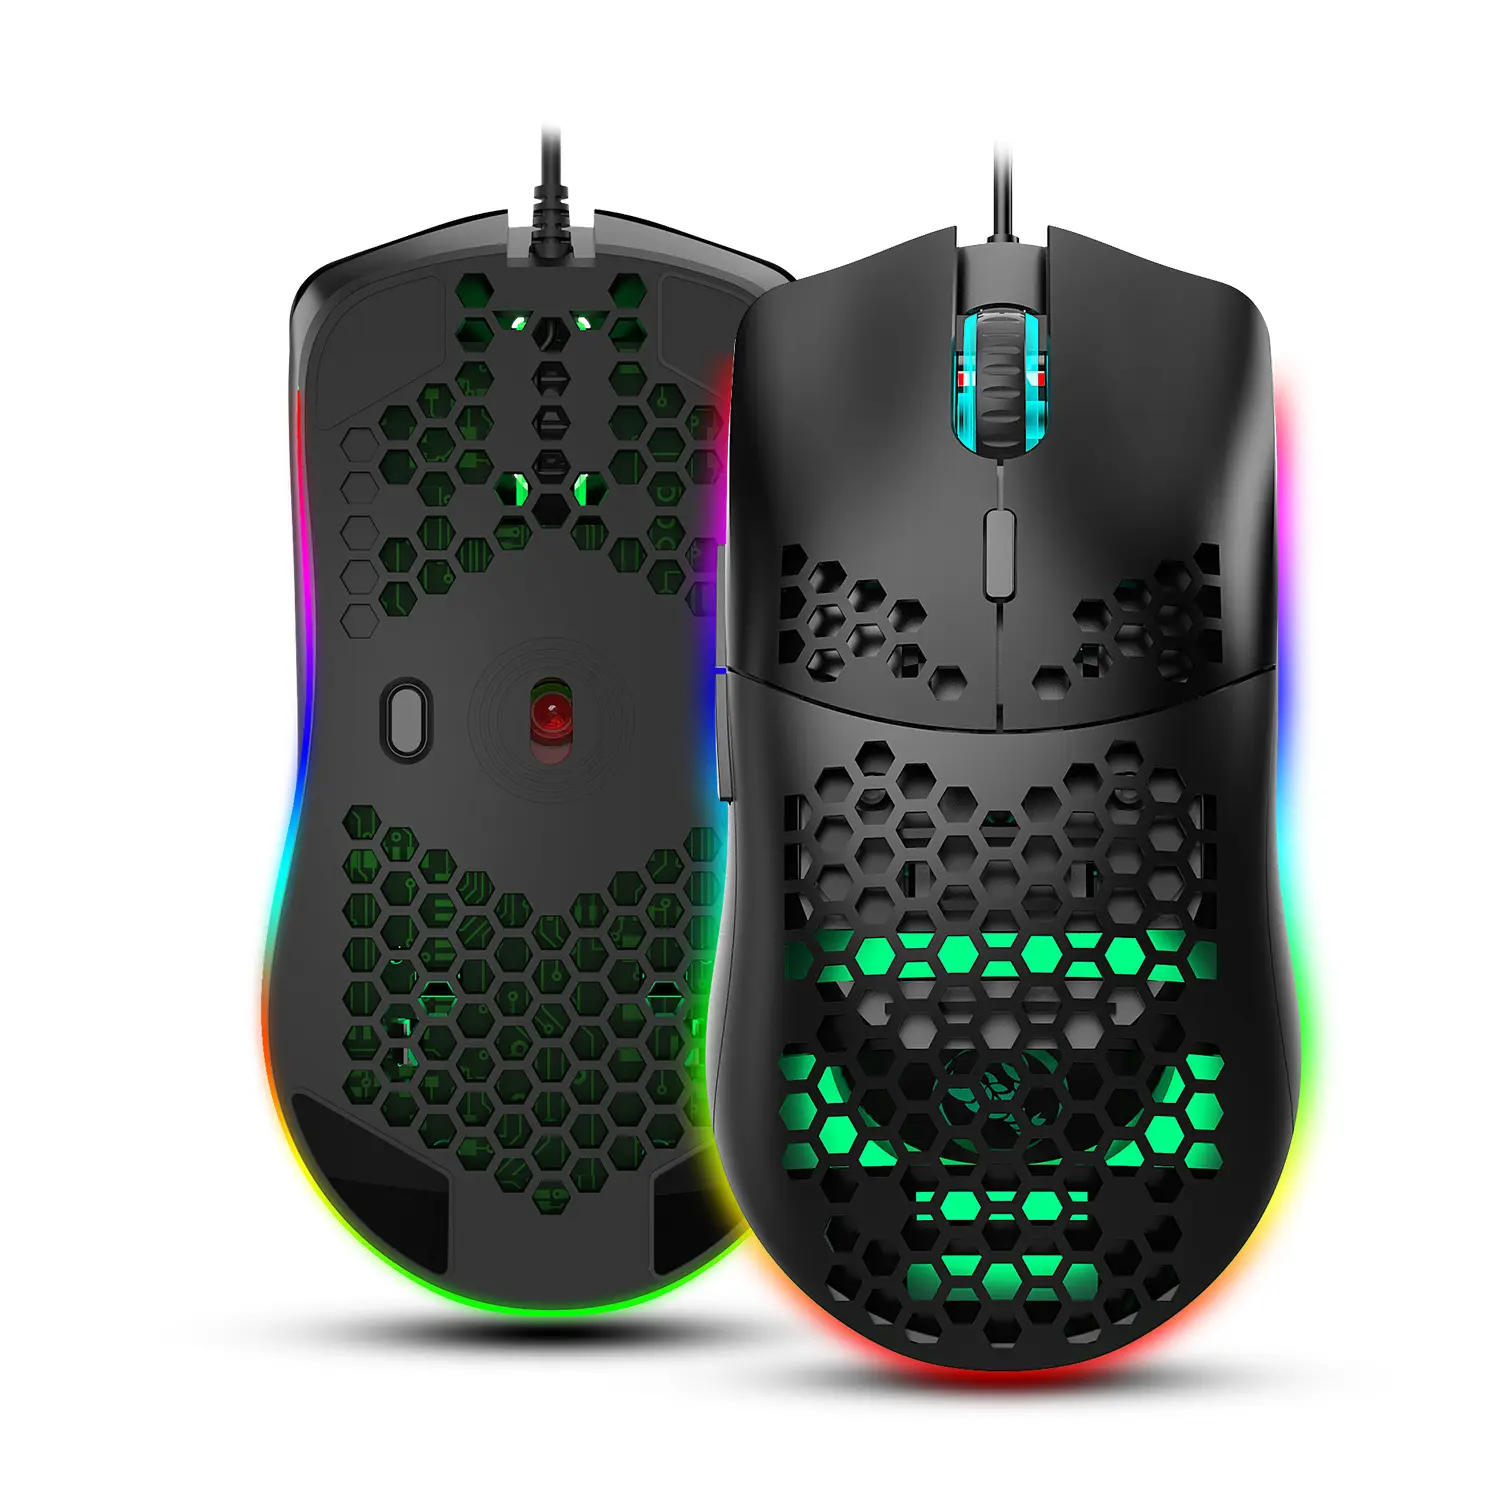 USB Wired Mouse RGB Gaming Mouse with Six Adjustable Up to 6400 DPI Ergonomic Design for Desktop Laptop PC Computer Office